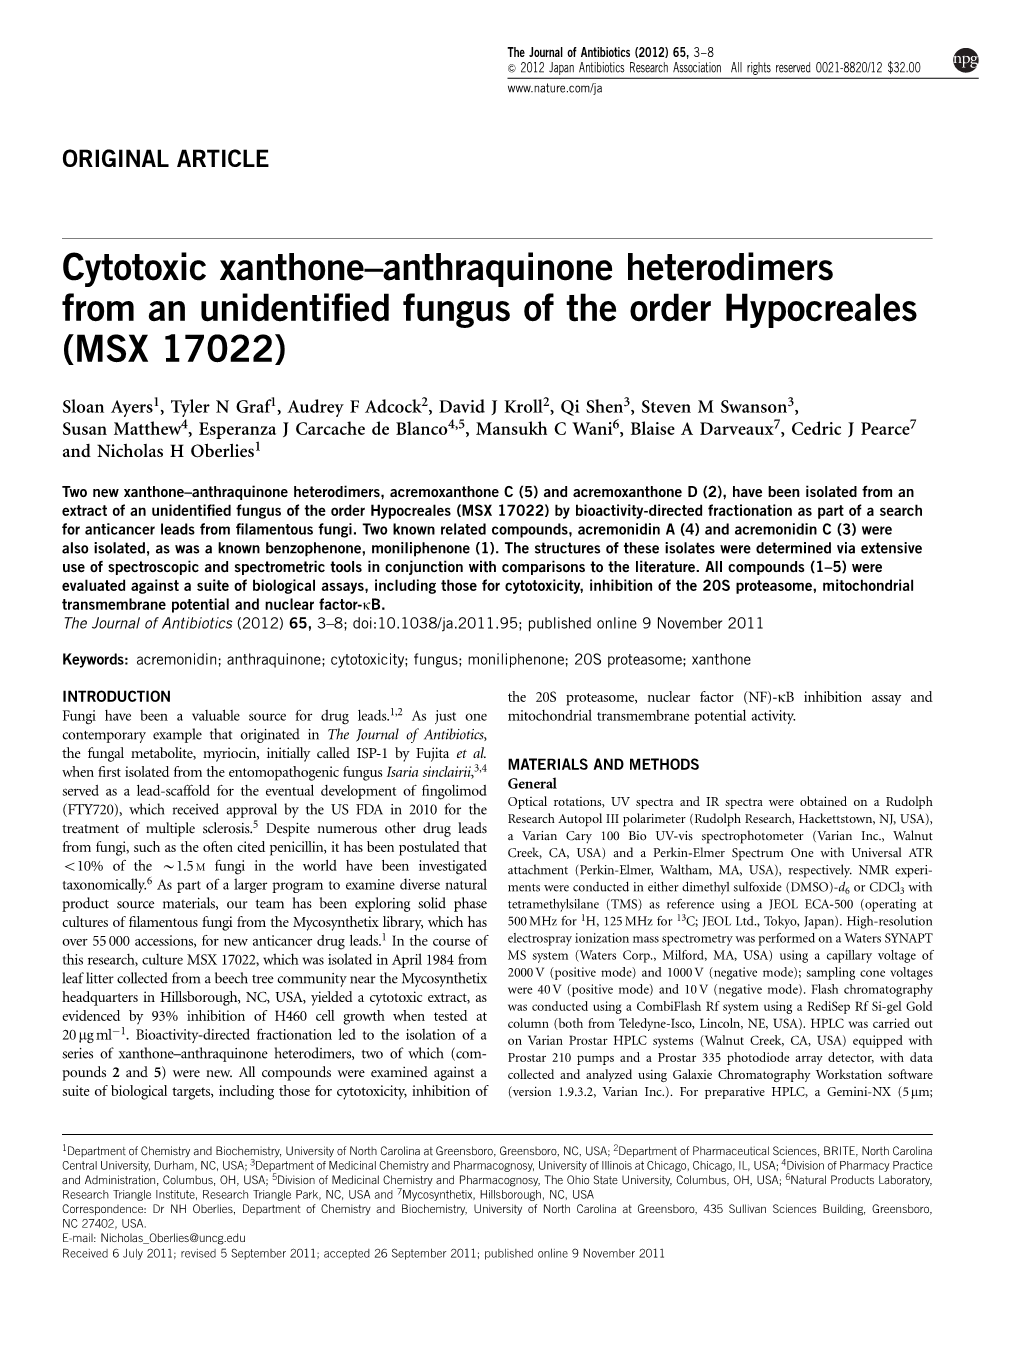 Cytotoxic Xanthone–Anthraquinone Heterodimers from an Unidentified